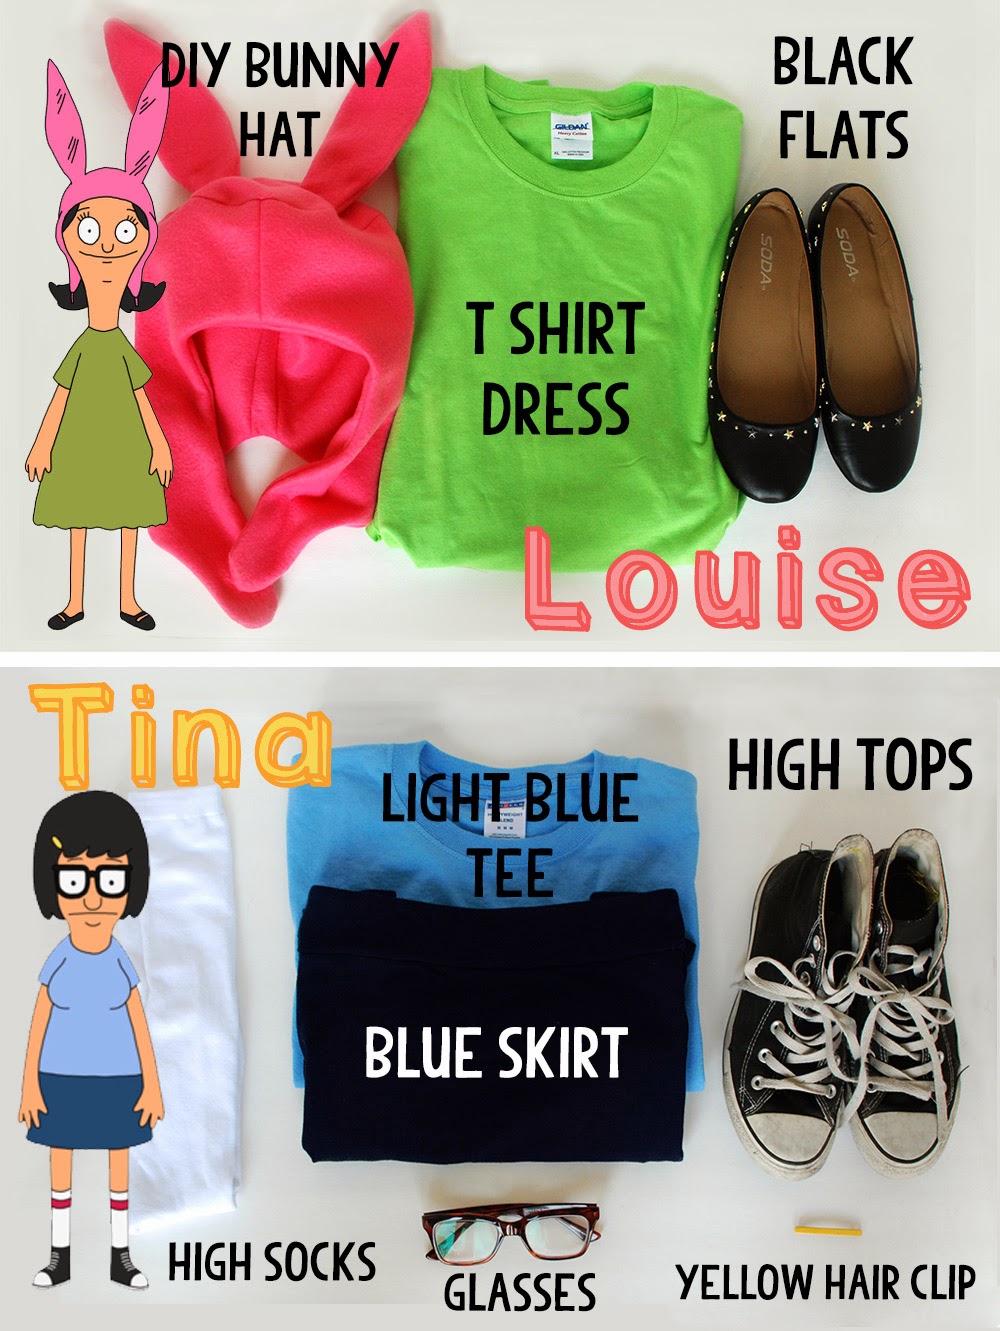 Sew a Louise Belcher / Bob's Burgers Hat : 7 Steps (with Pictures) -  Instructables